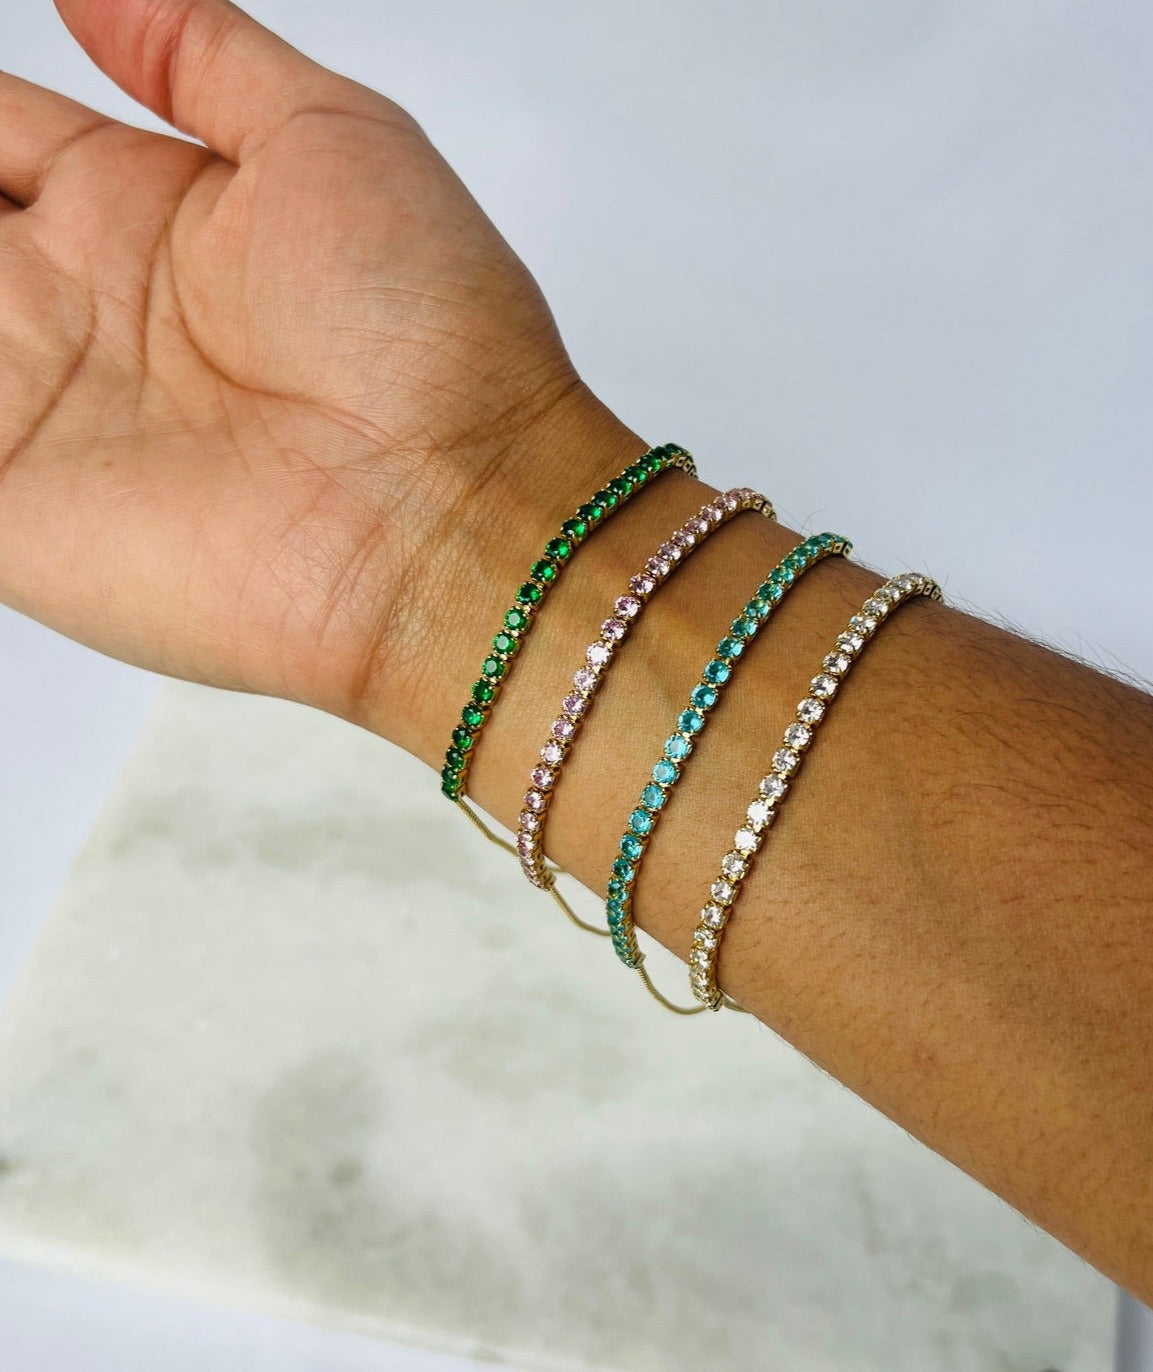 all crystal bracelets with drawstring in different colors, perfect gift for birthday